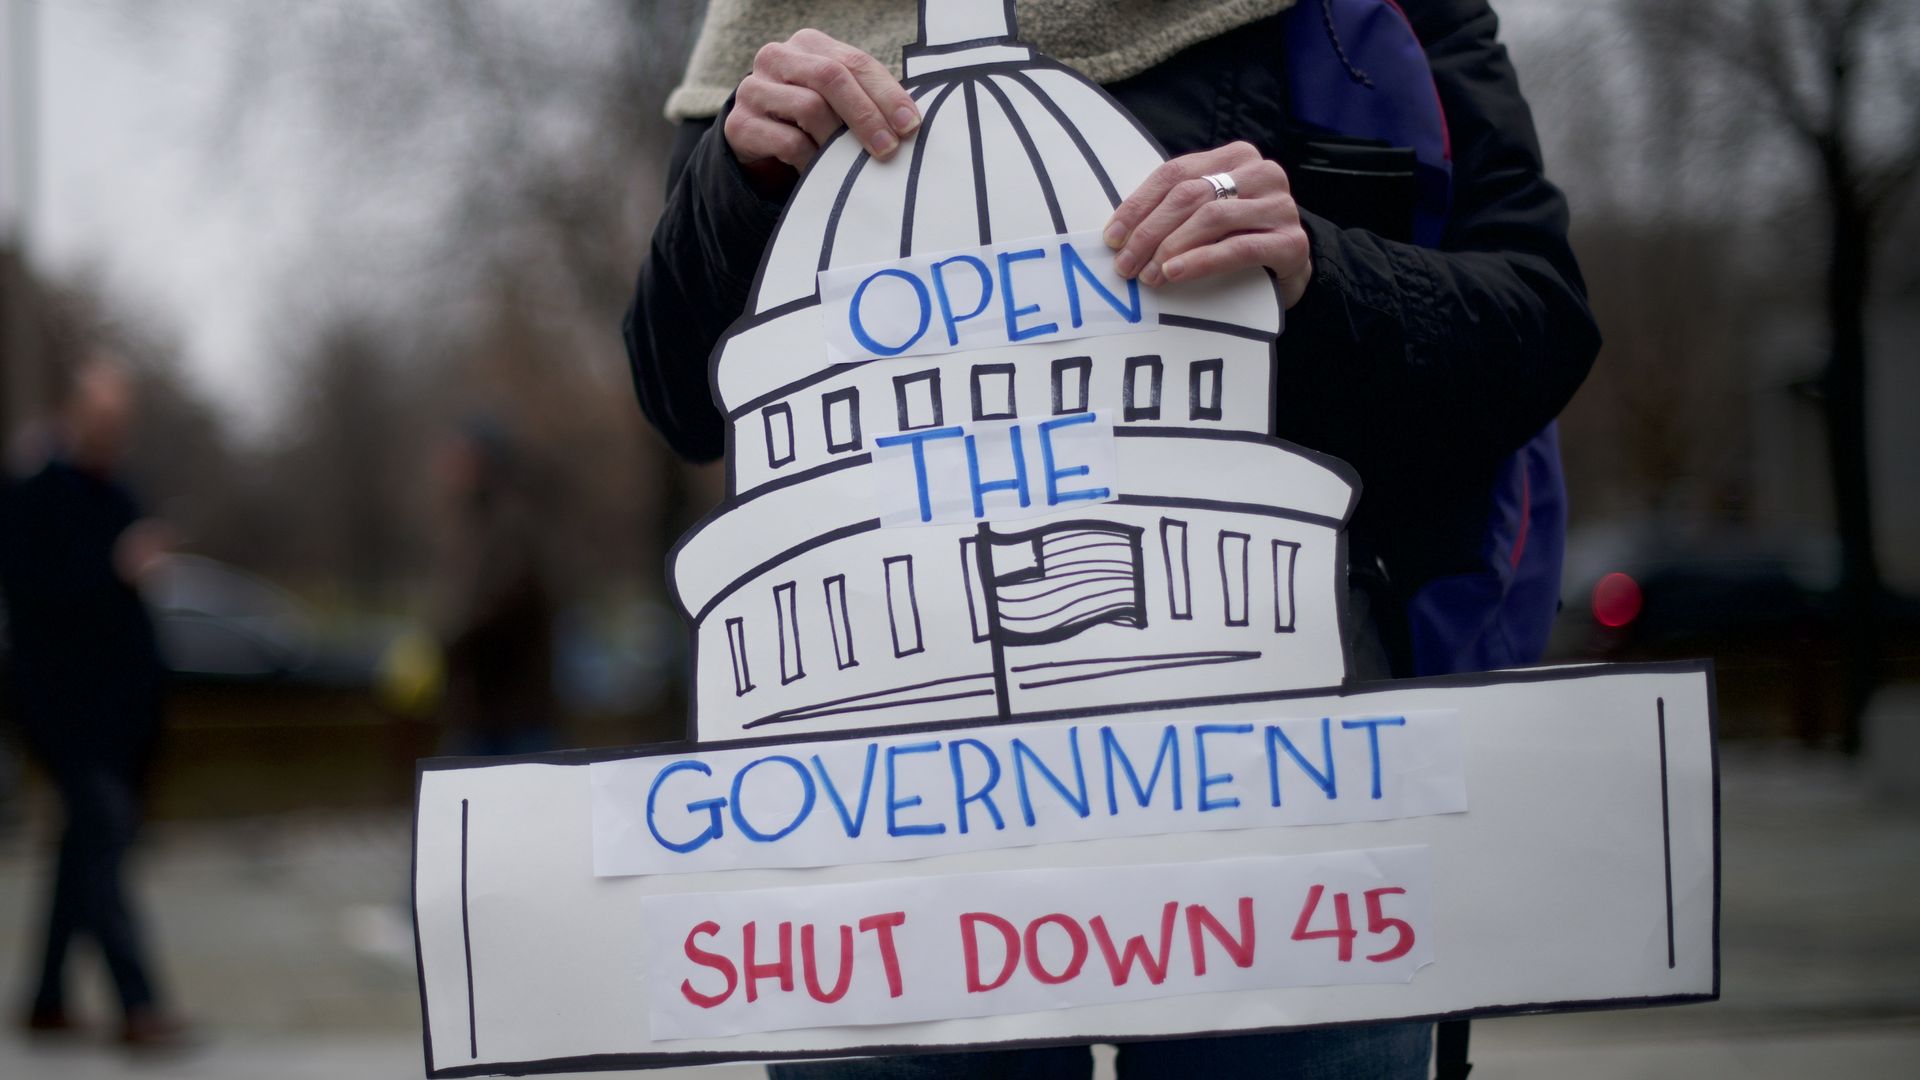 demonstrator holds a sign shaped as the U.S. Capitol building stating 'OPEN THE GOVERNMENT SHUT DOWN 45'